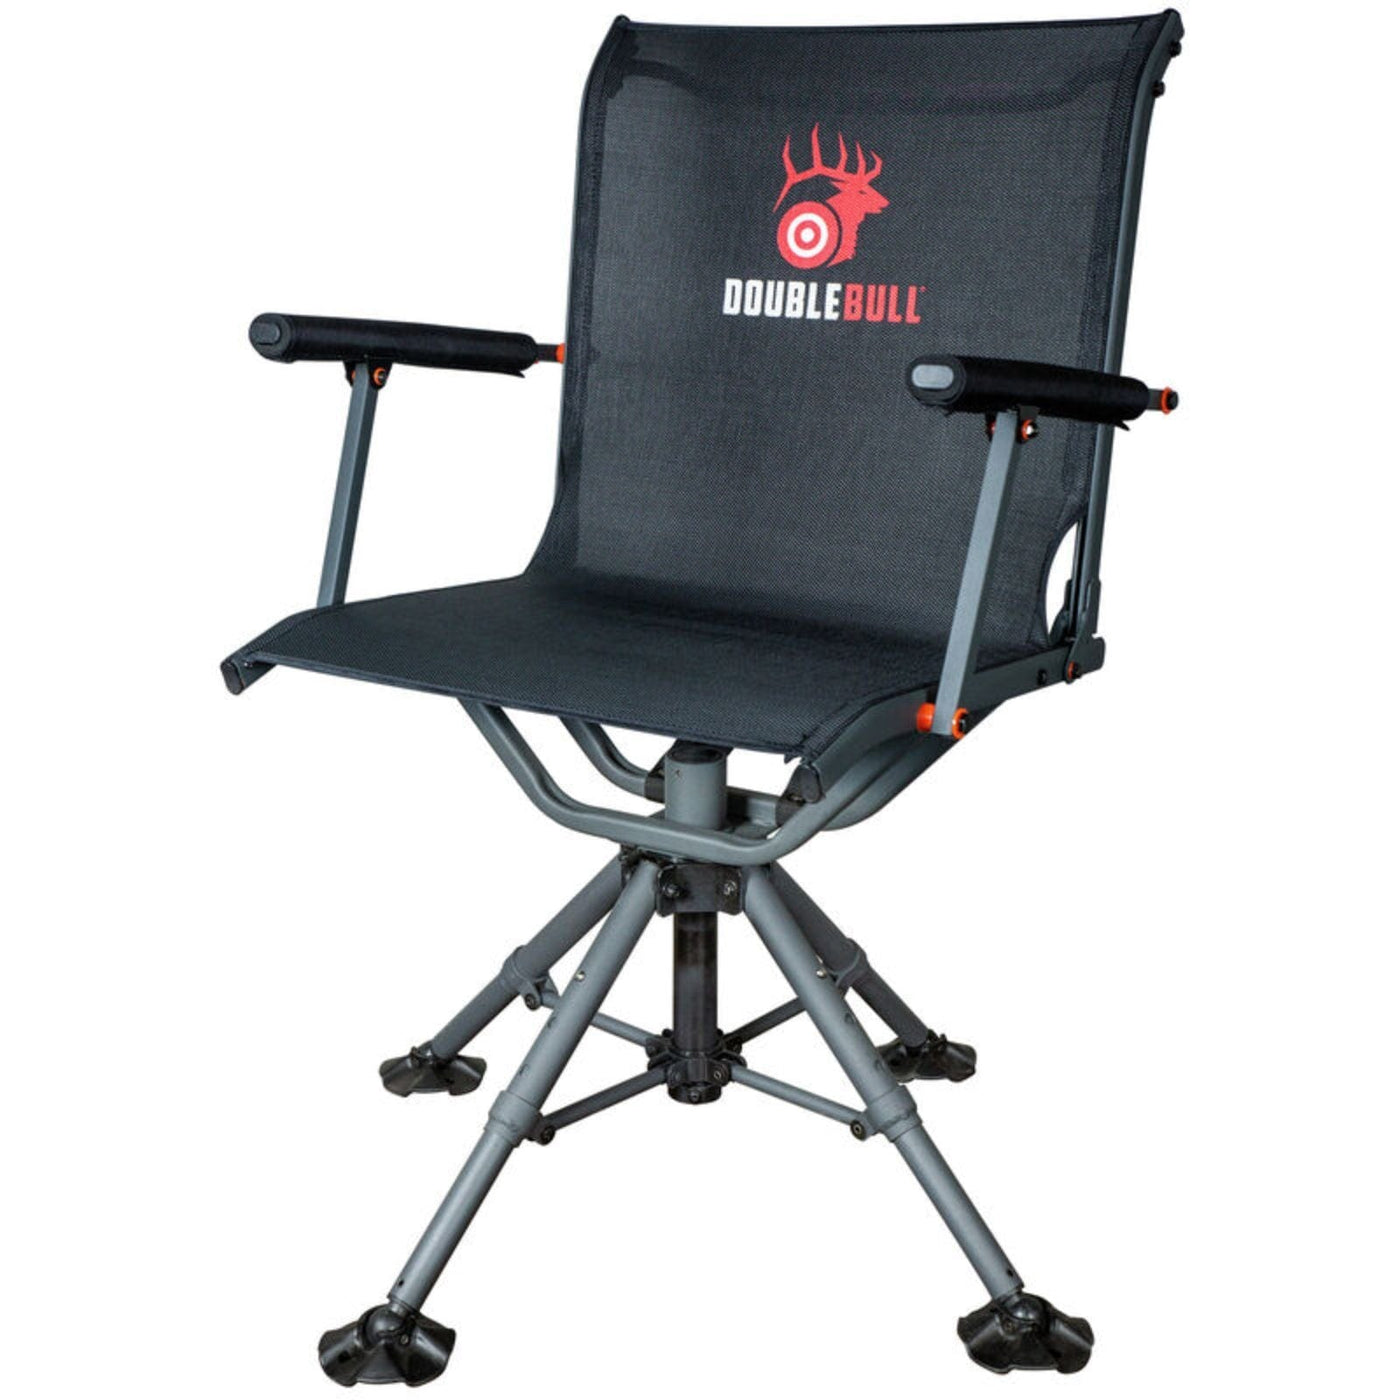 Primos Primos Double Bull Swivel Chair Hunting